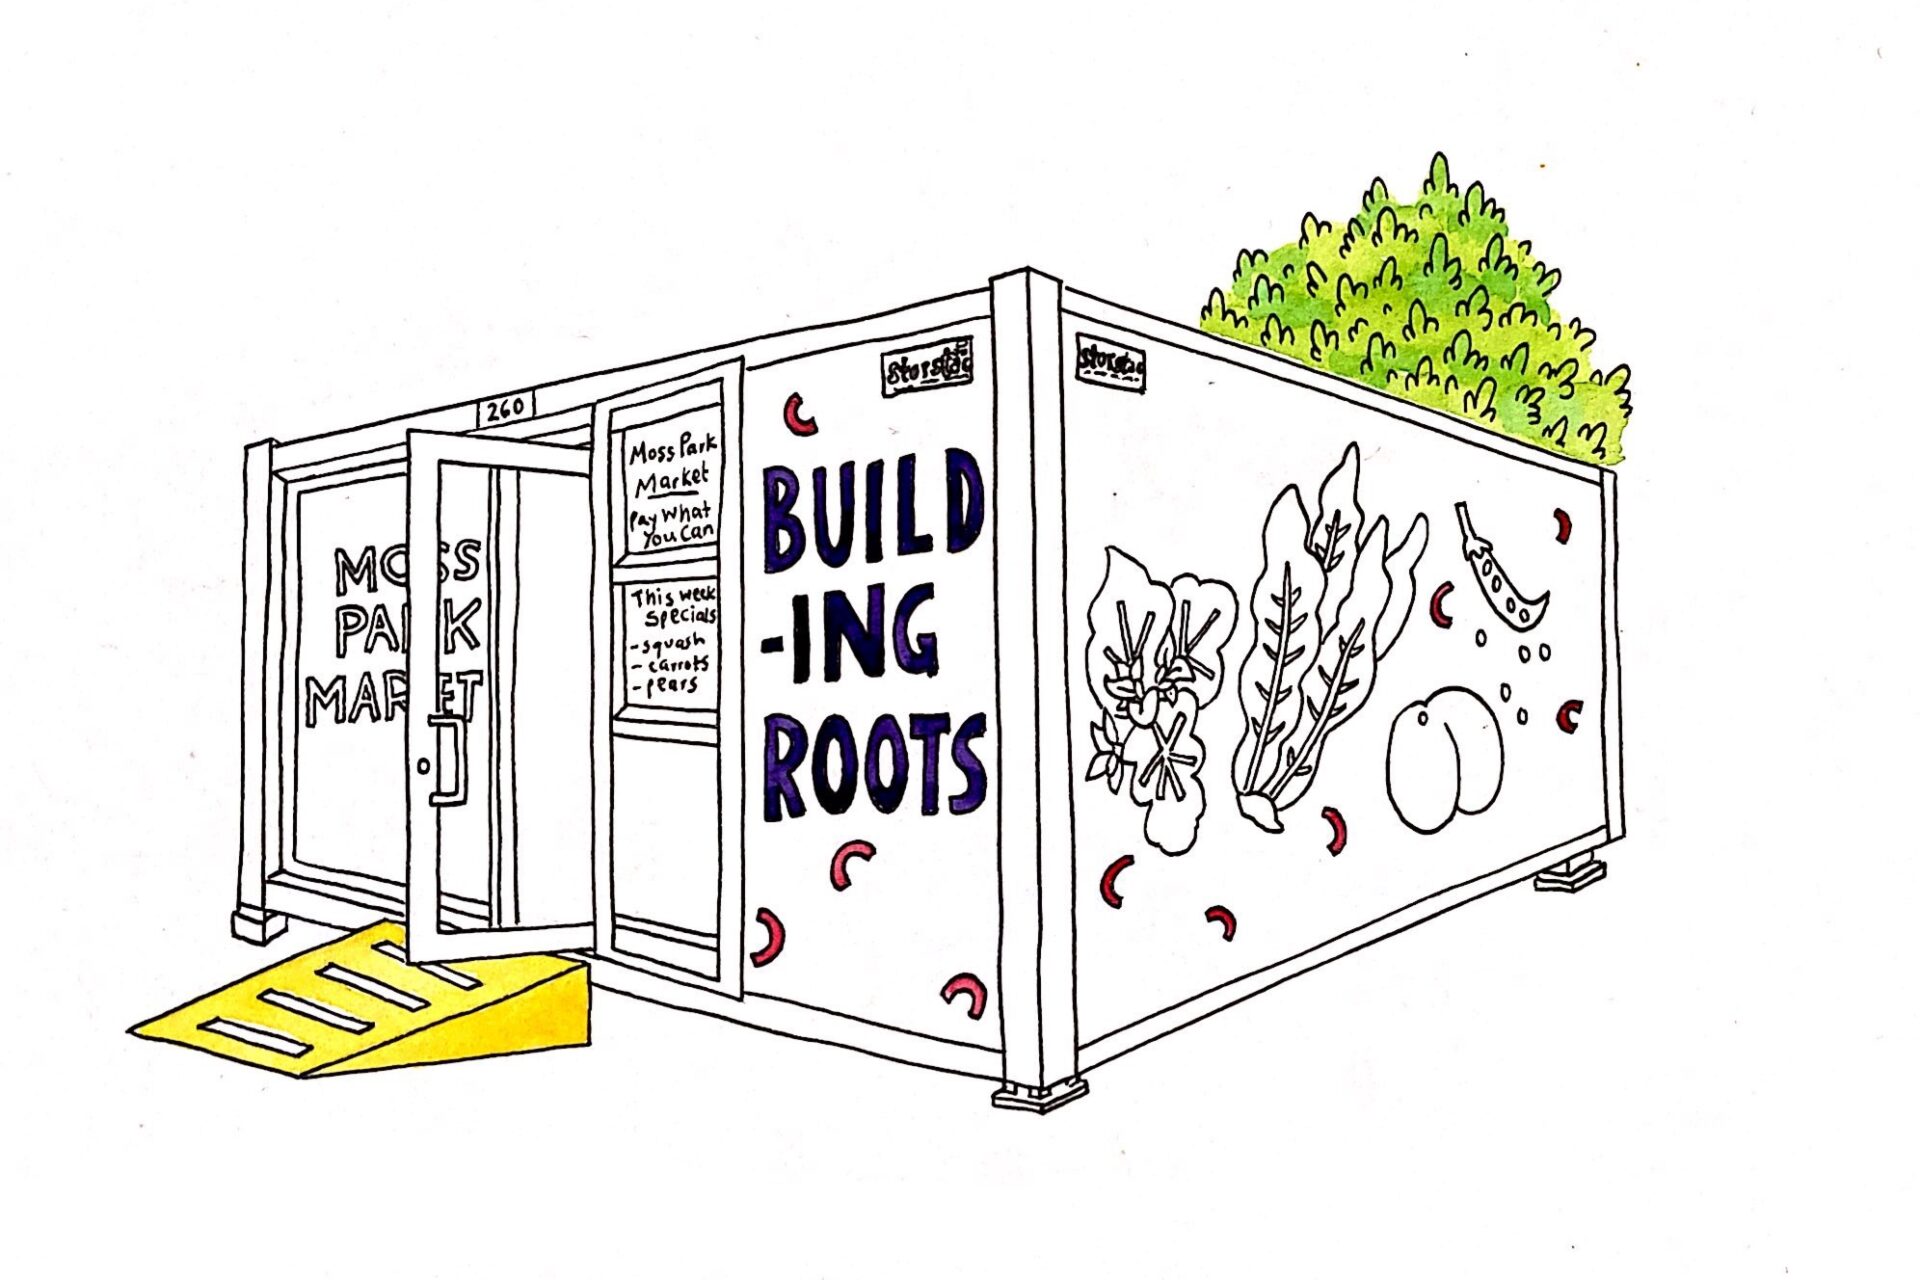 A hand-drawn image of a shipping container with "Building Roots" written on the front